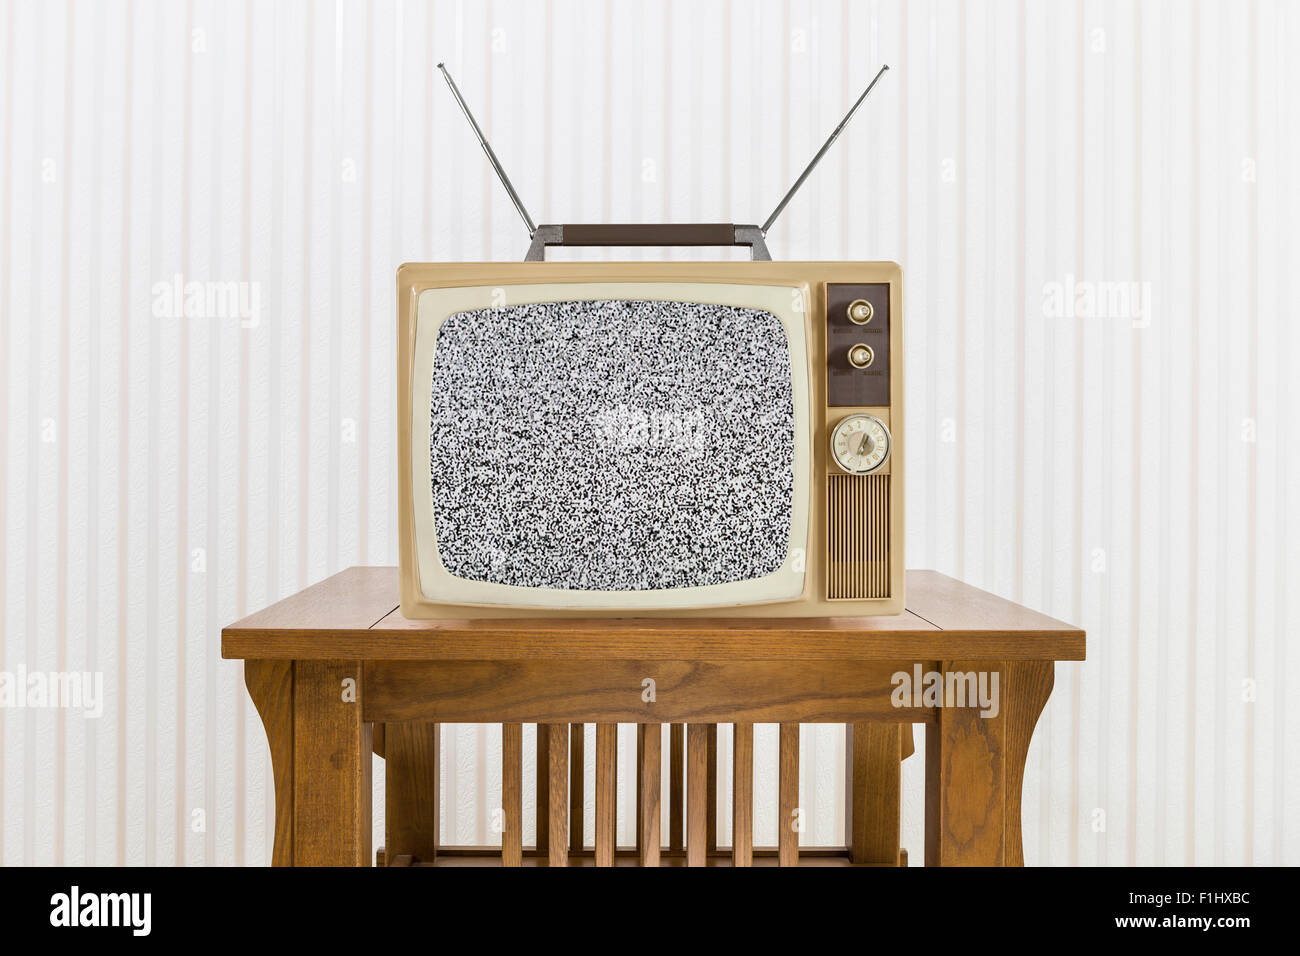 Old television with antenna on wood table with static screen. Stock Photo